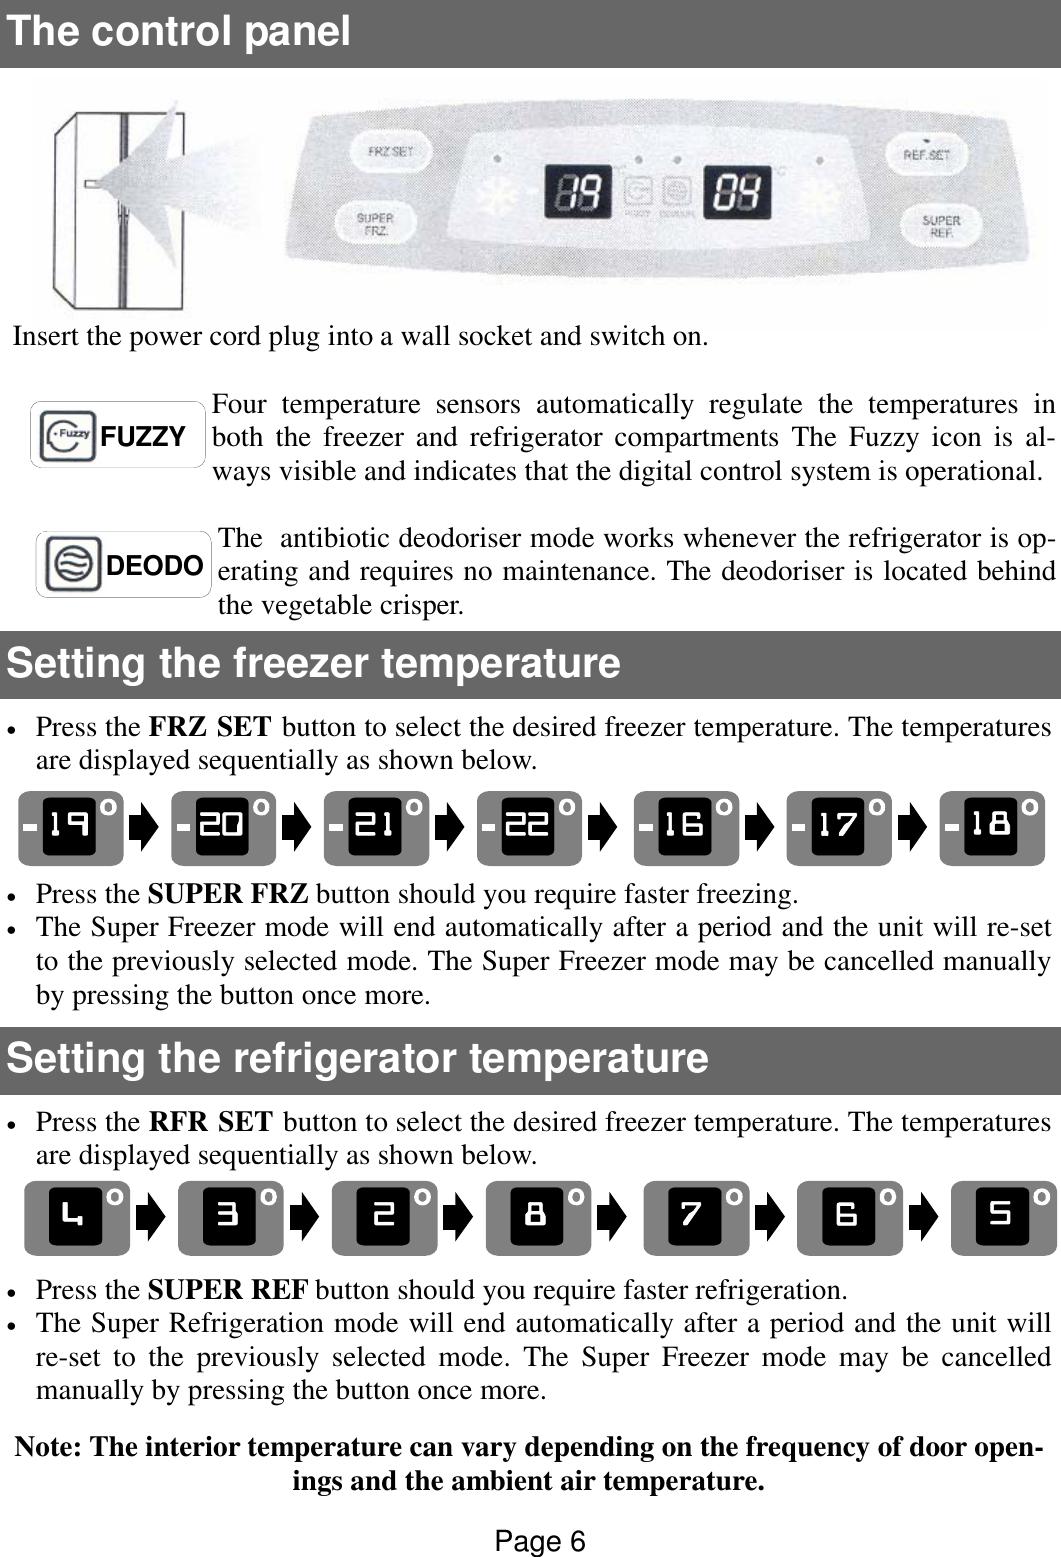 Page 6 of 12 - Defy Defy-Side-By-Side-Frost-Free-Refrigerator-Freezer-570-Users-Manual- 570 LITRE SIDE X DFF389 AND 390  Defy-side-by-side-frost-free-refrigerator-freezer-570-users-manual